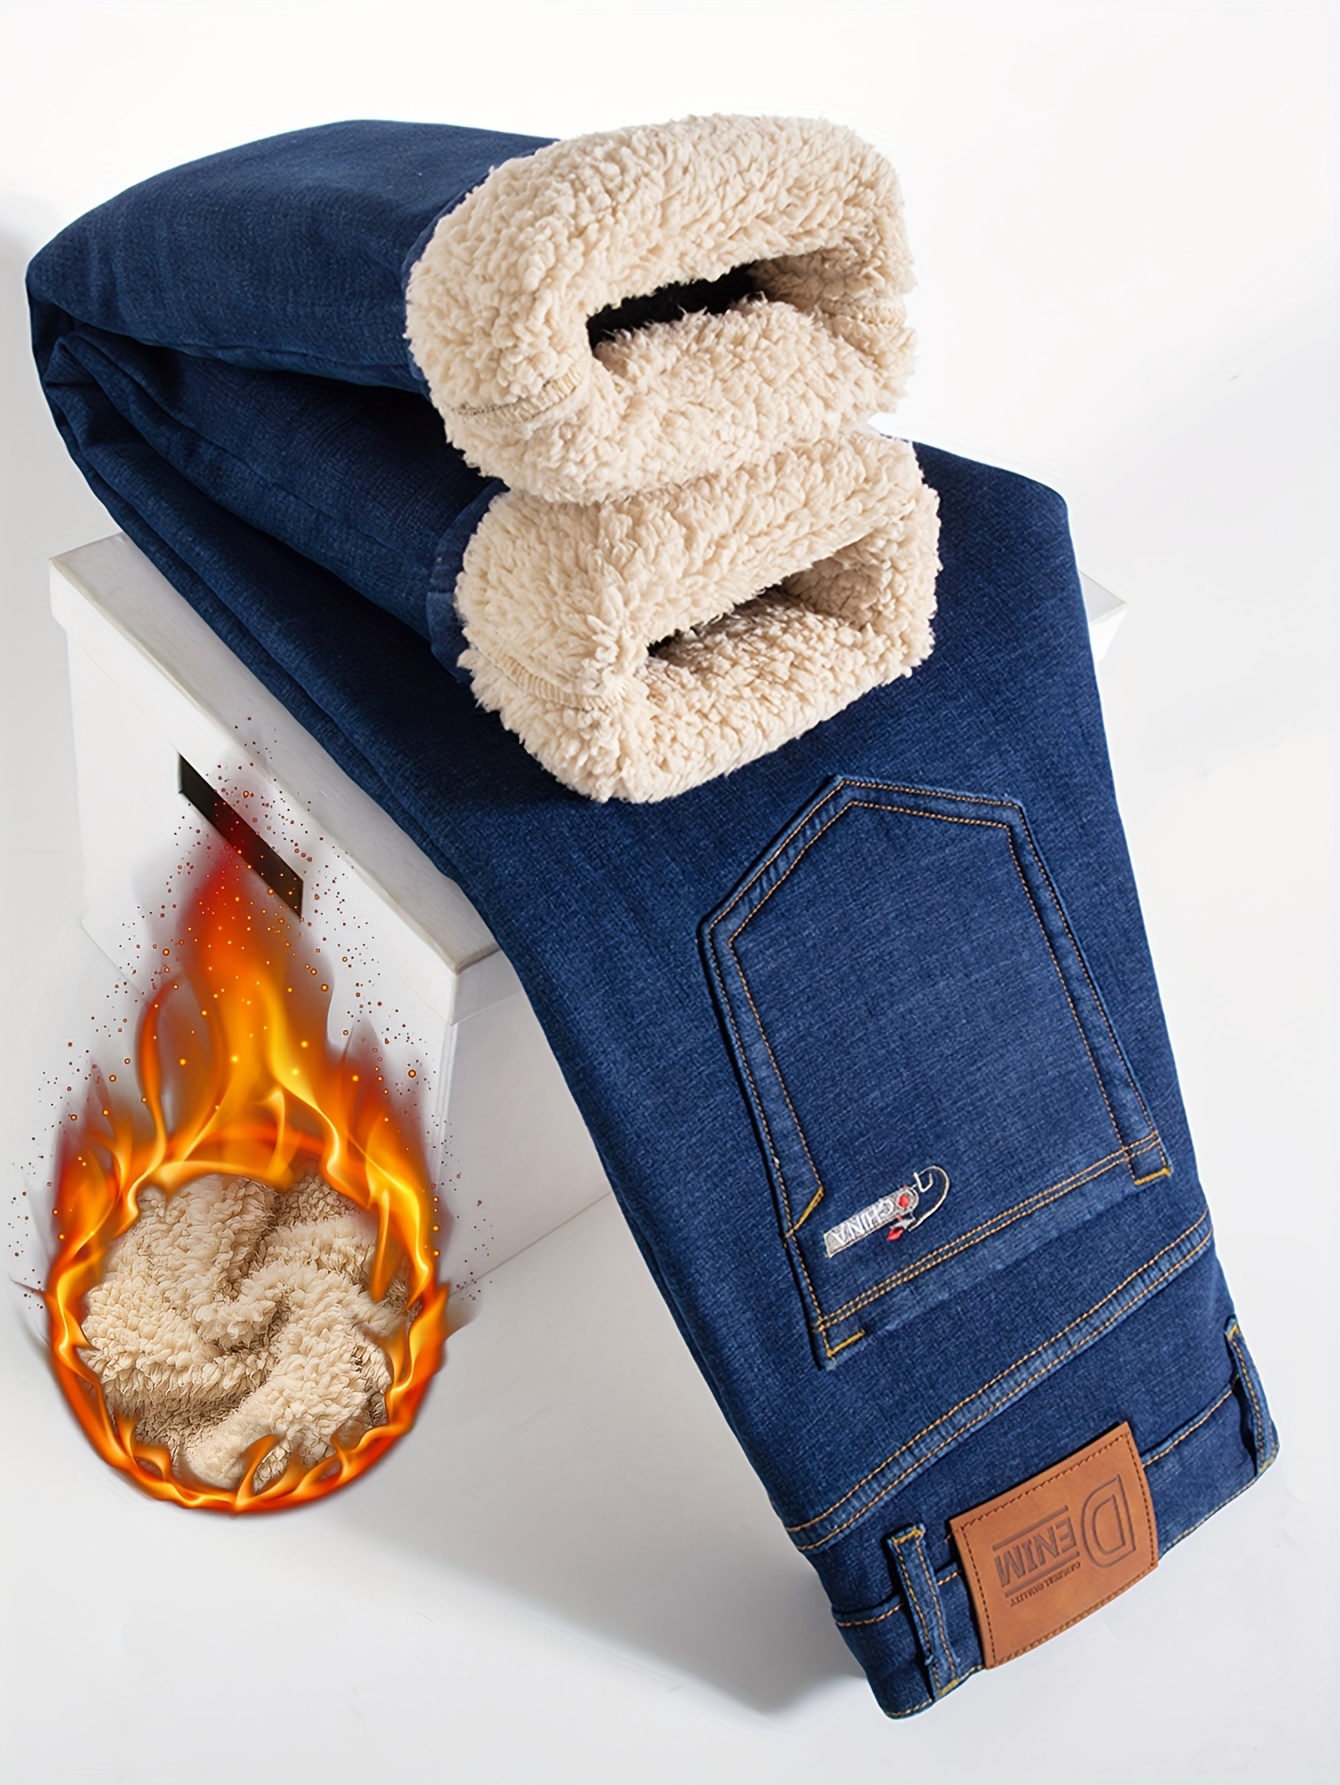 Blanket Lined Denim: Stay Warm In Style With The Ultimate Winter Jeans